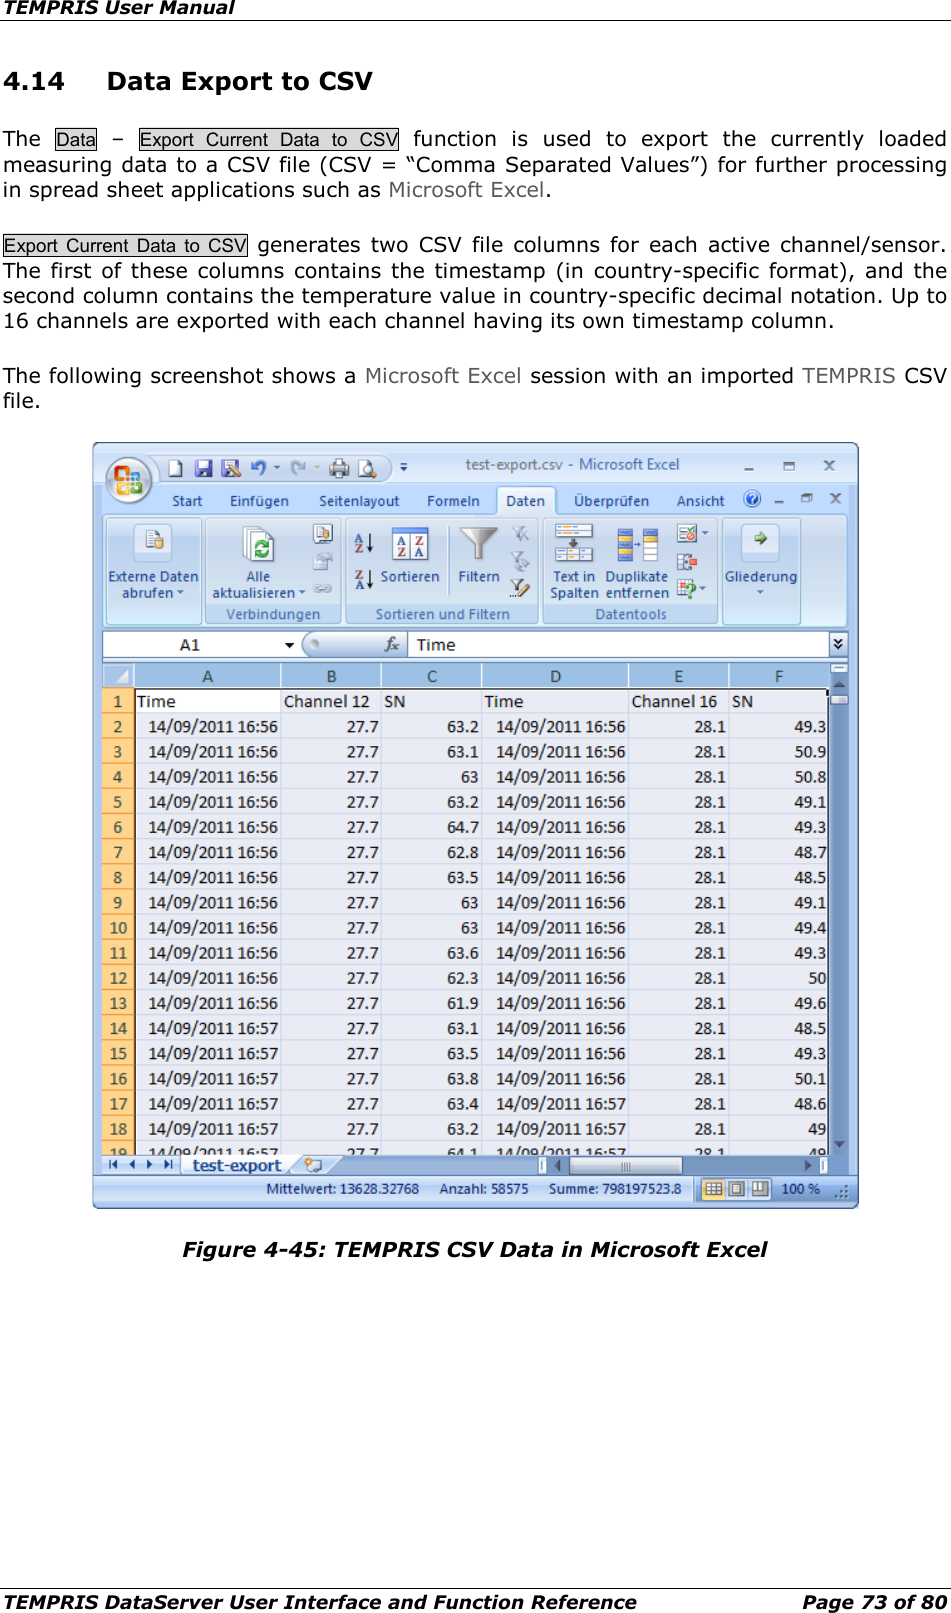 TEMPRIS User Manual TEMPRIS DataServer User Interface and Function Reference Page 73 of 80 4.14 Data Export to CSV The Data  –  Export  Current  Data to CSV function is used to export the  currently loaded measuring data to a CSV file (CSV = “Comma Separated Values”) for further processing in spread sheet applications such as Microsoft Excel. Export Current Data to CSV generates two CSV file columns for each active channel/sensor. The first of these columns contains the timestamp (in country-specific format), and the second column contains the temperature value in country-specific decimal notation. Up to 16 channels are exported with each channel having its own timestamp column. The following screenshot shows a Microsoft Excel session with an imported TEMPRIS CSV file.  Figure 4-45: TEMPRIS CSV Data in Microsoft Excel    